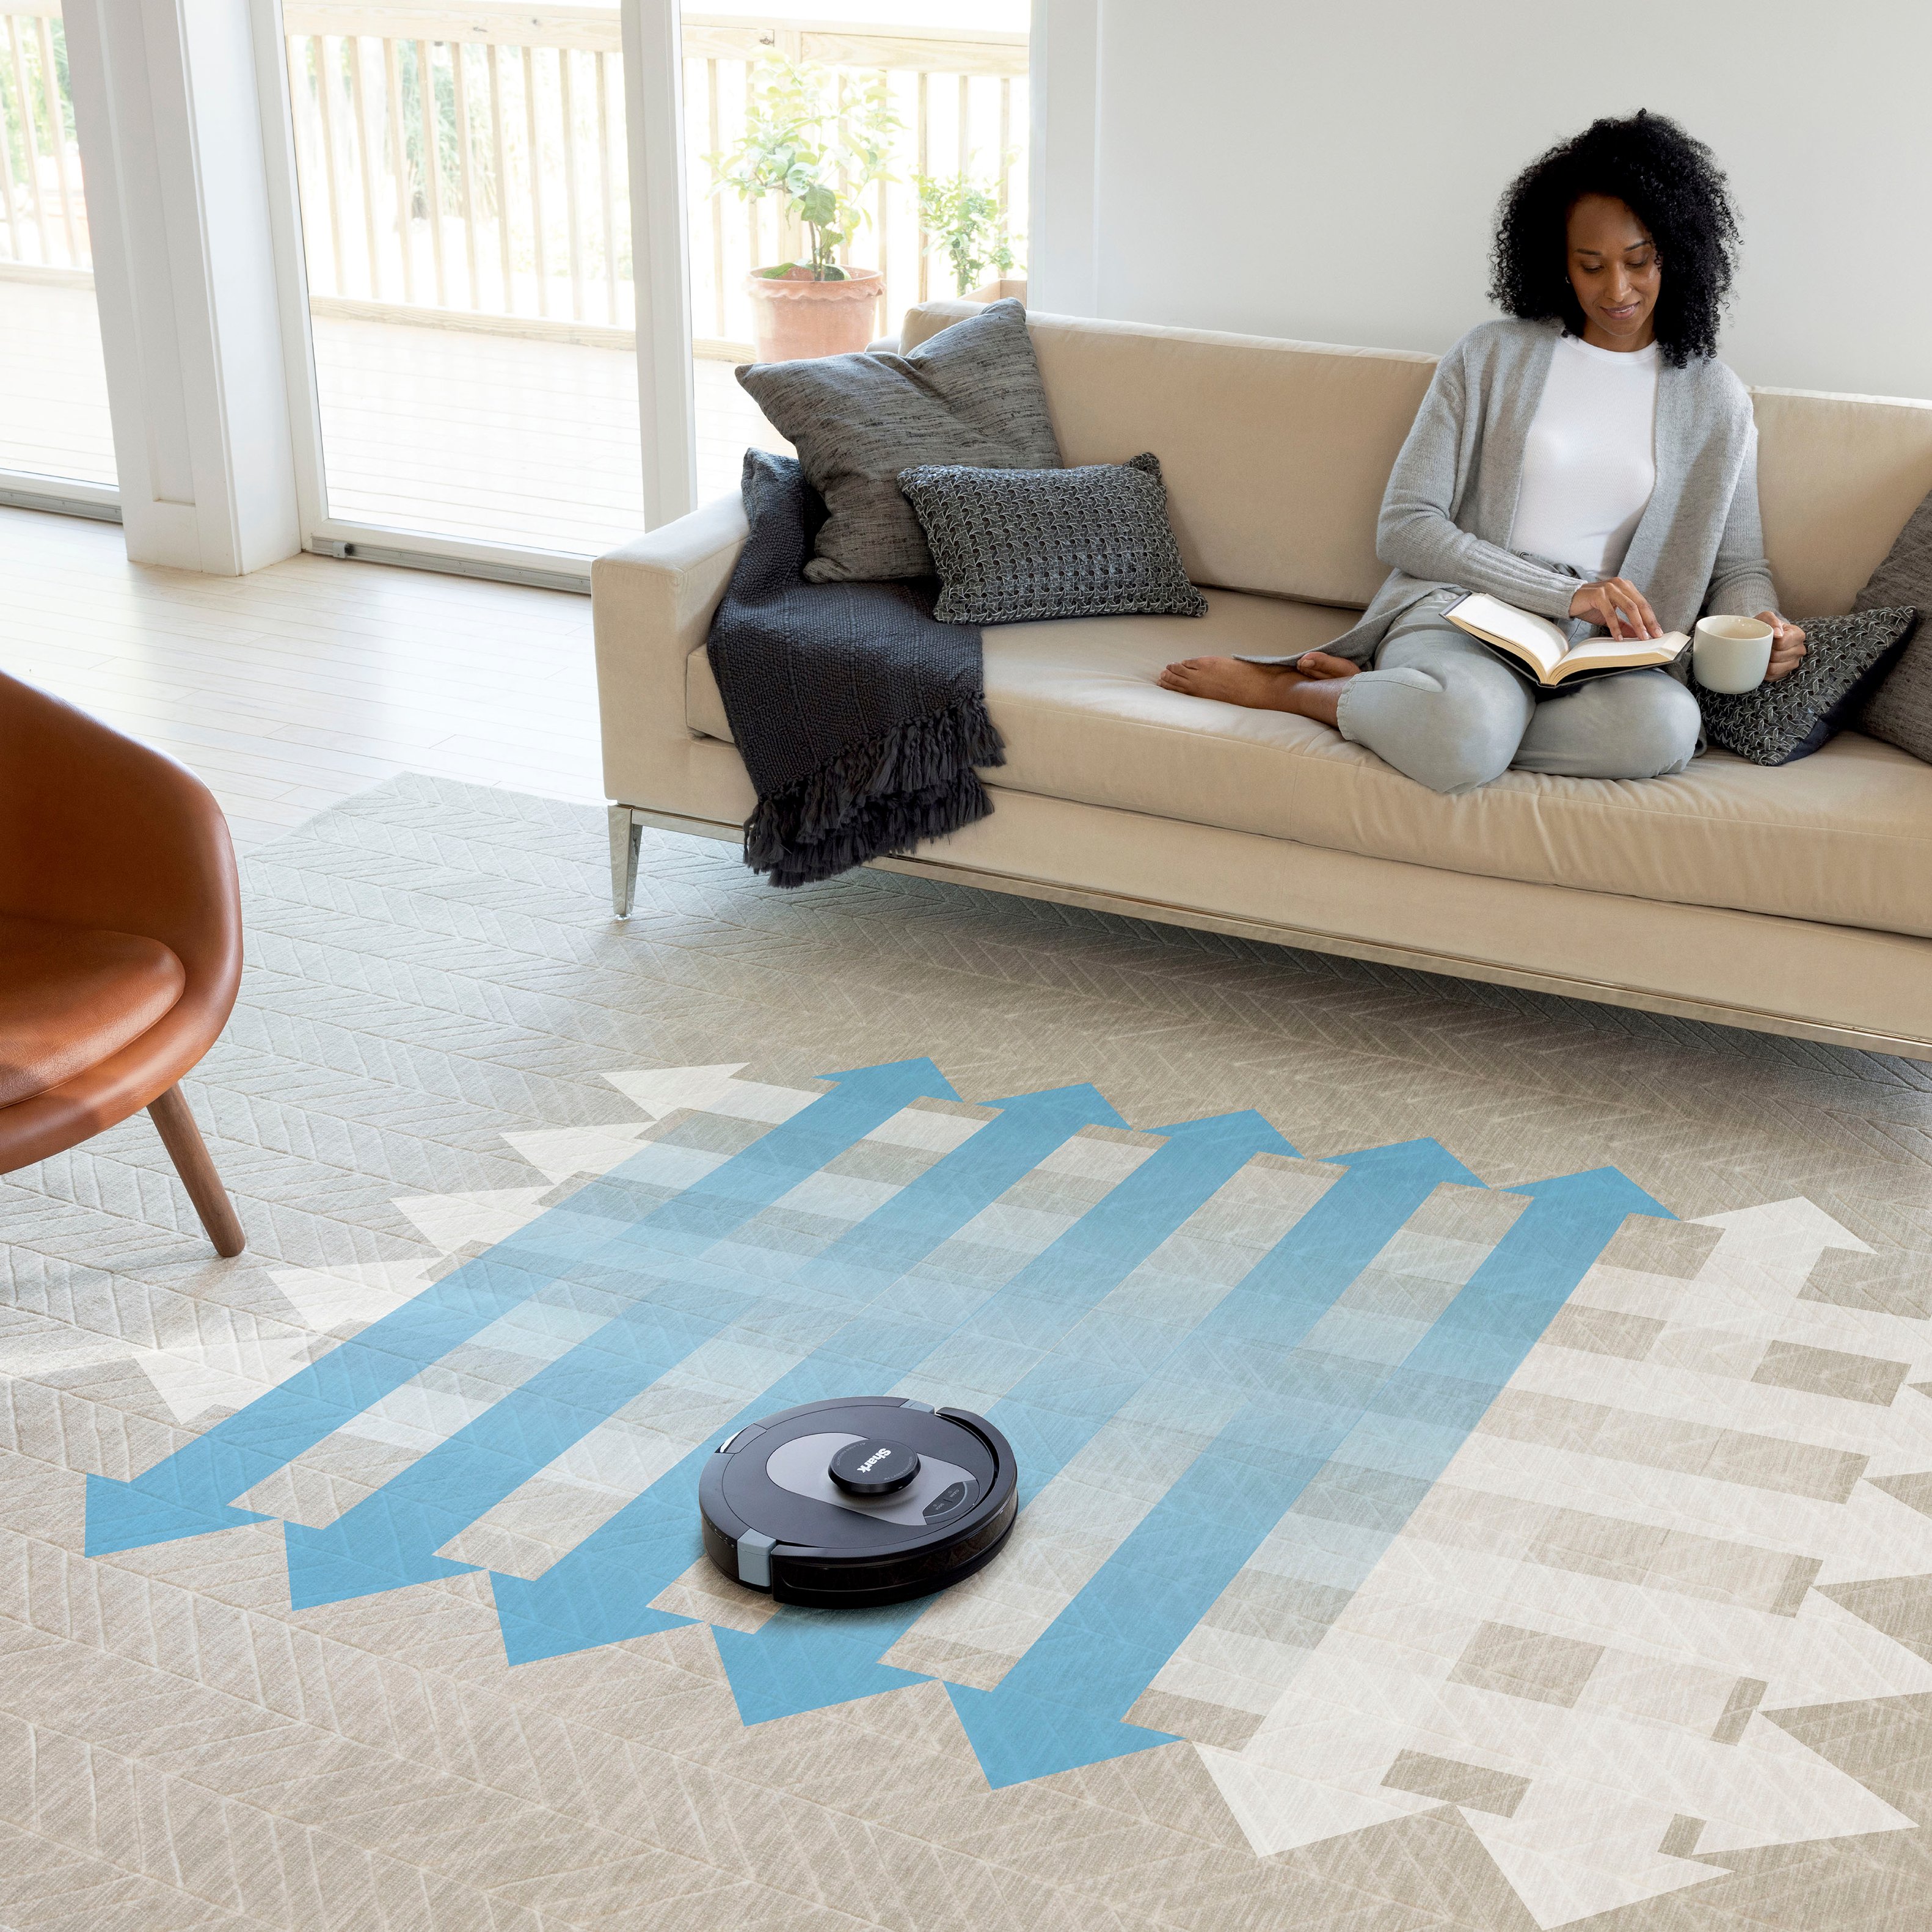 Left View: bObsweep - Dustin Wi-Fi Connected Self-Emptying Robot Vacuum and Mop - Night